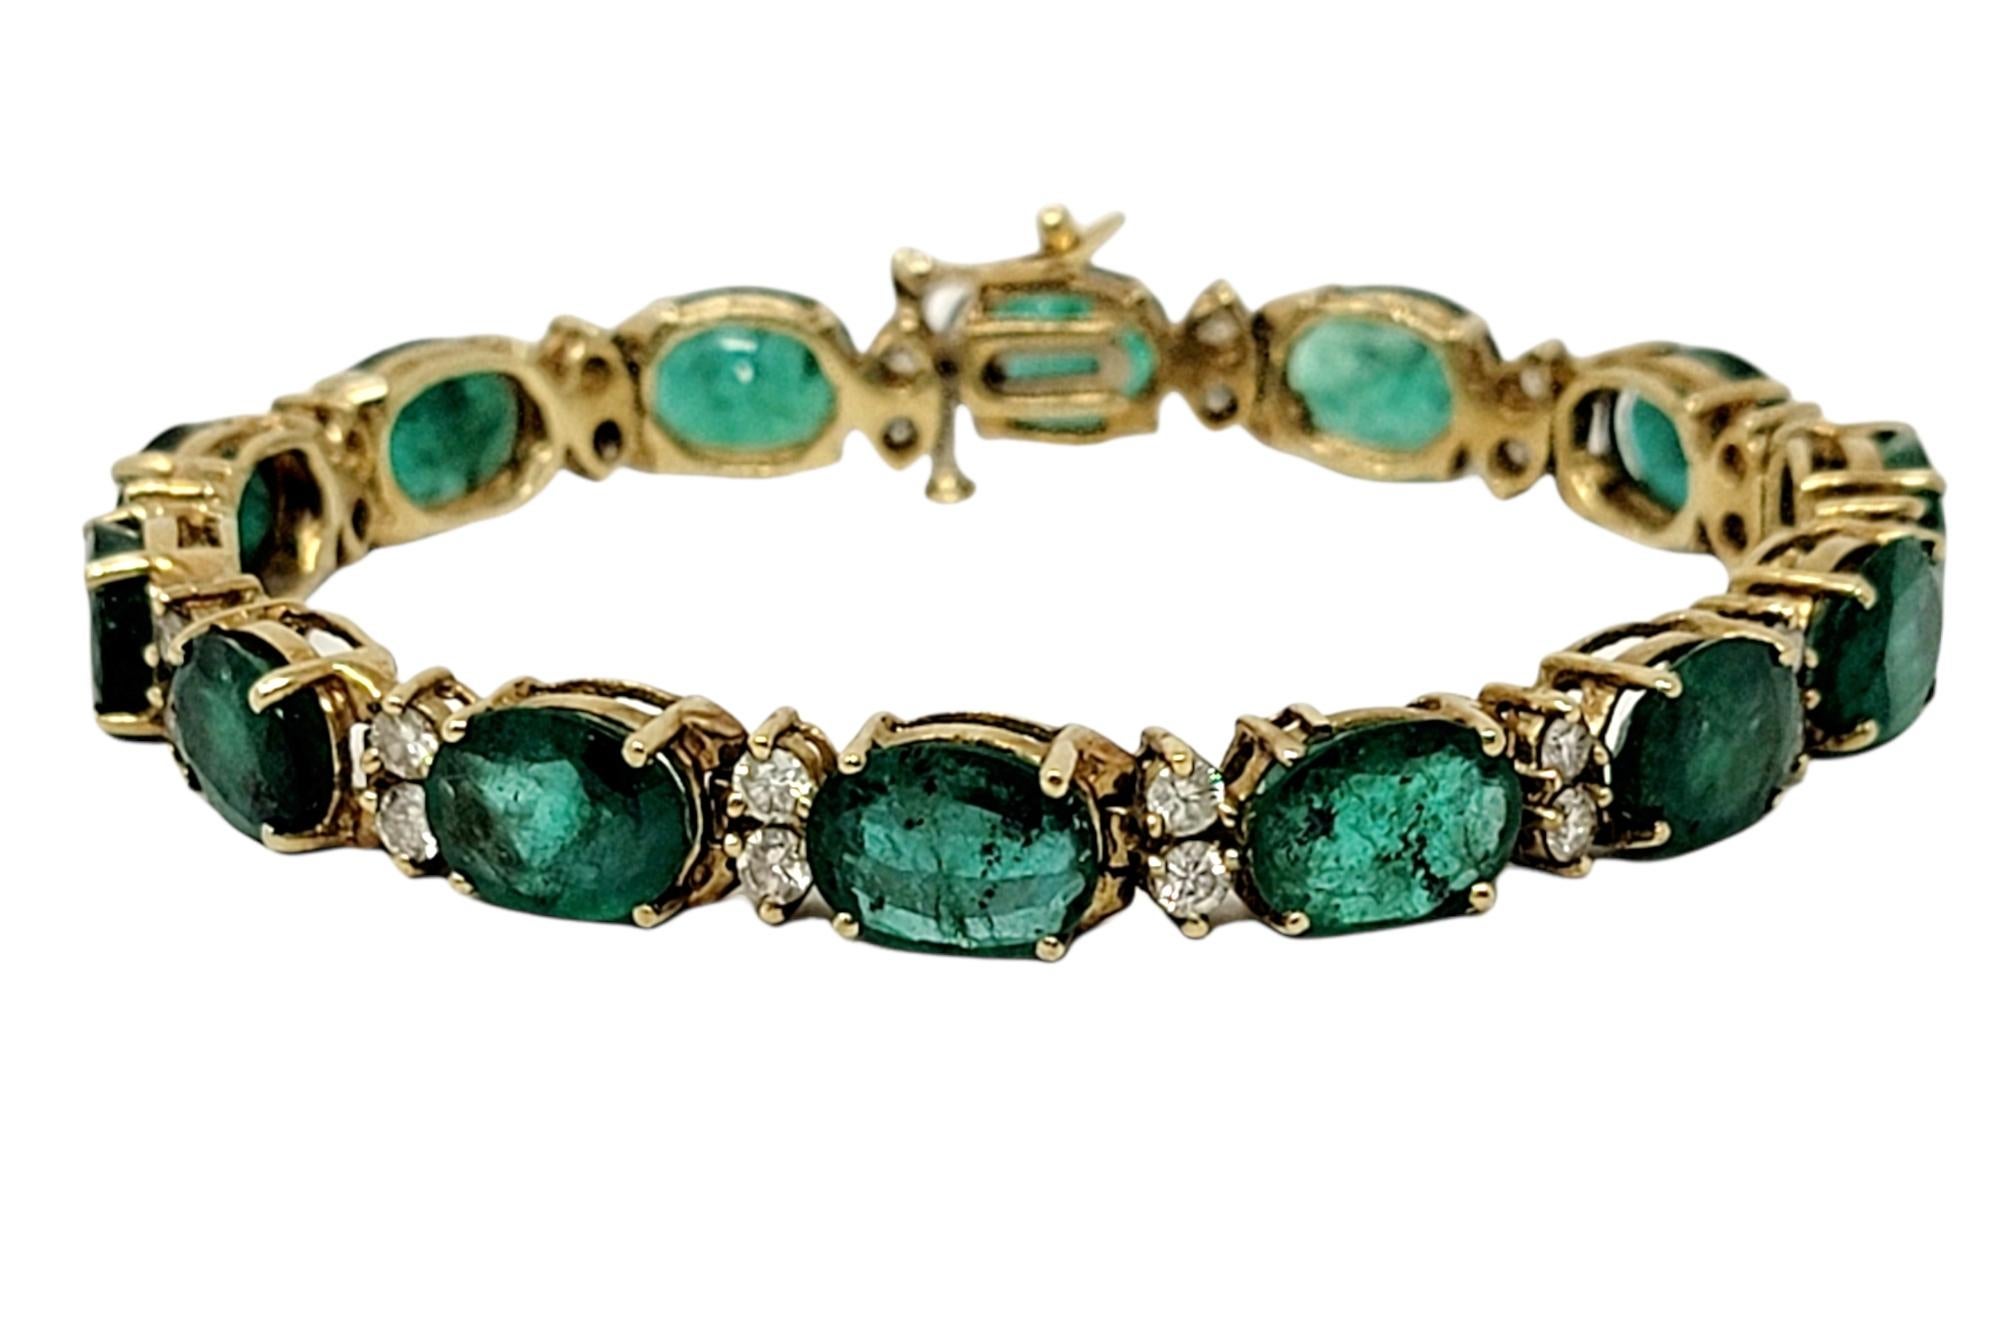 Contemporary 19.40 Carats Oval Mixed Cut Emerald and Diamond Line Bracelet in 14 Karat Gold